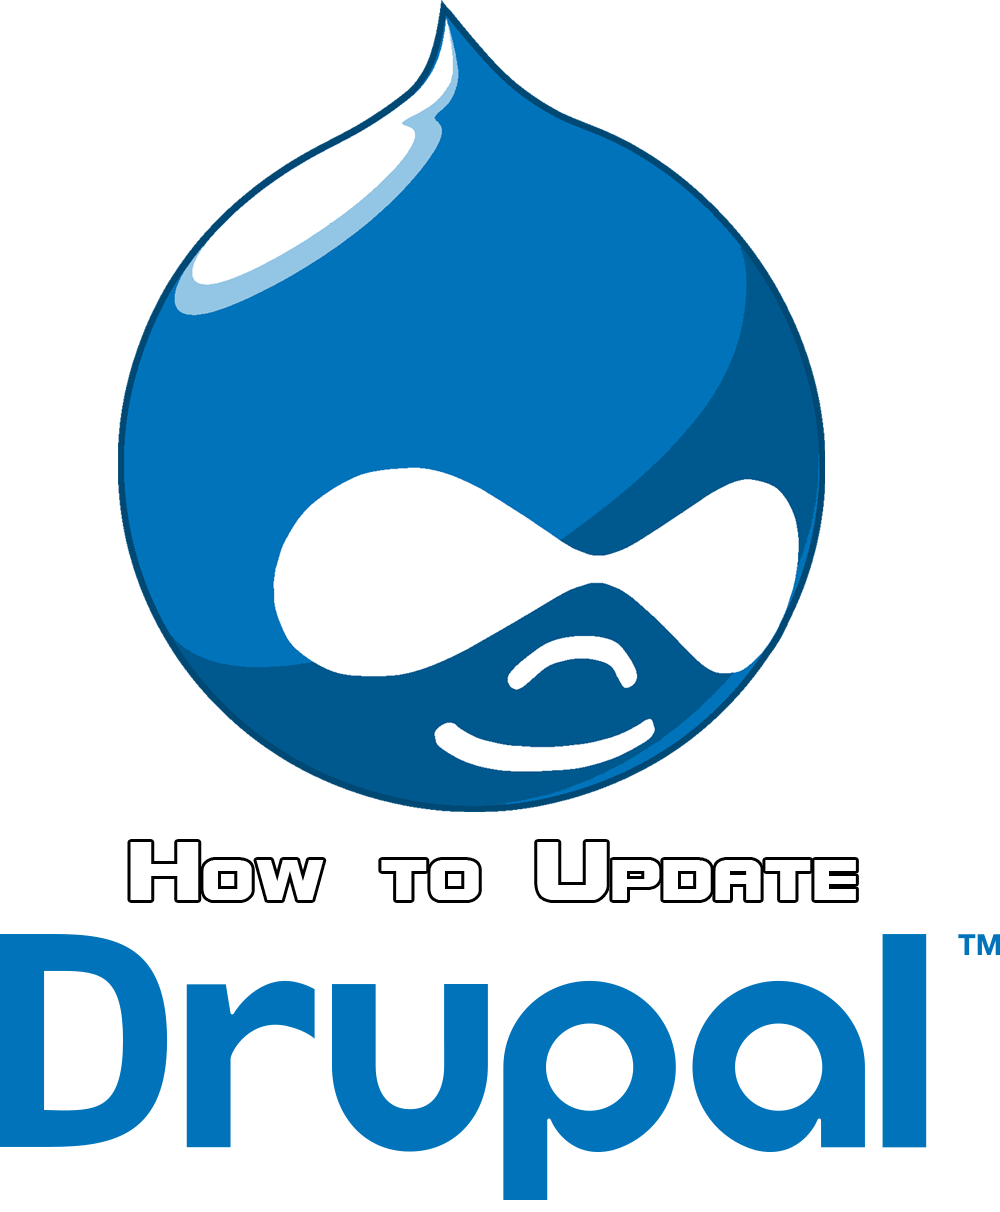 how to update drupal